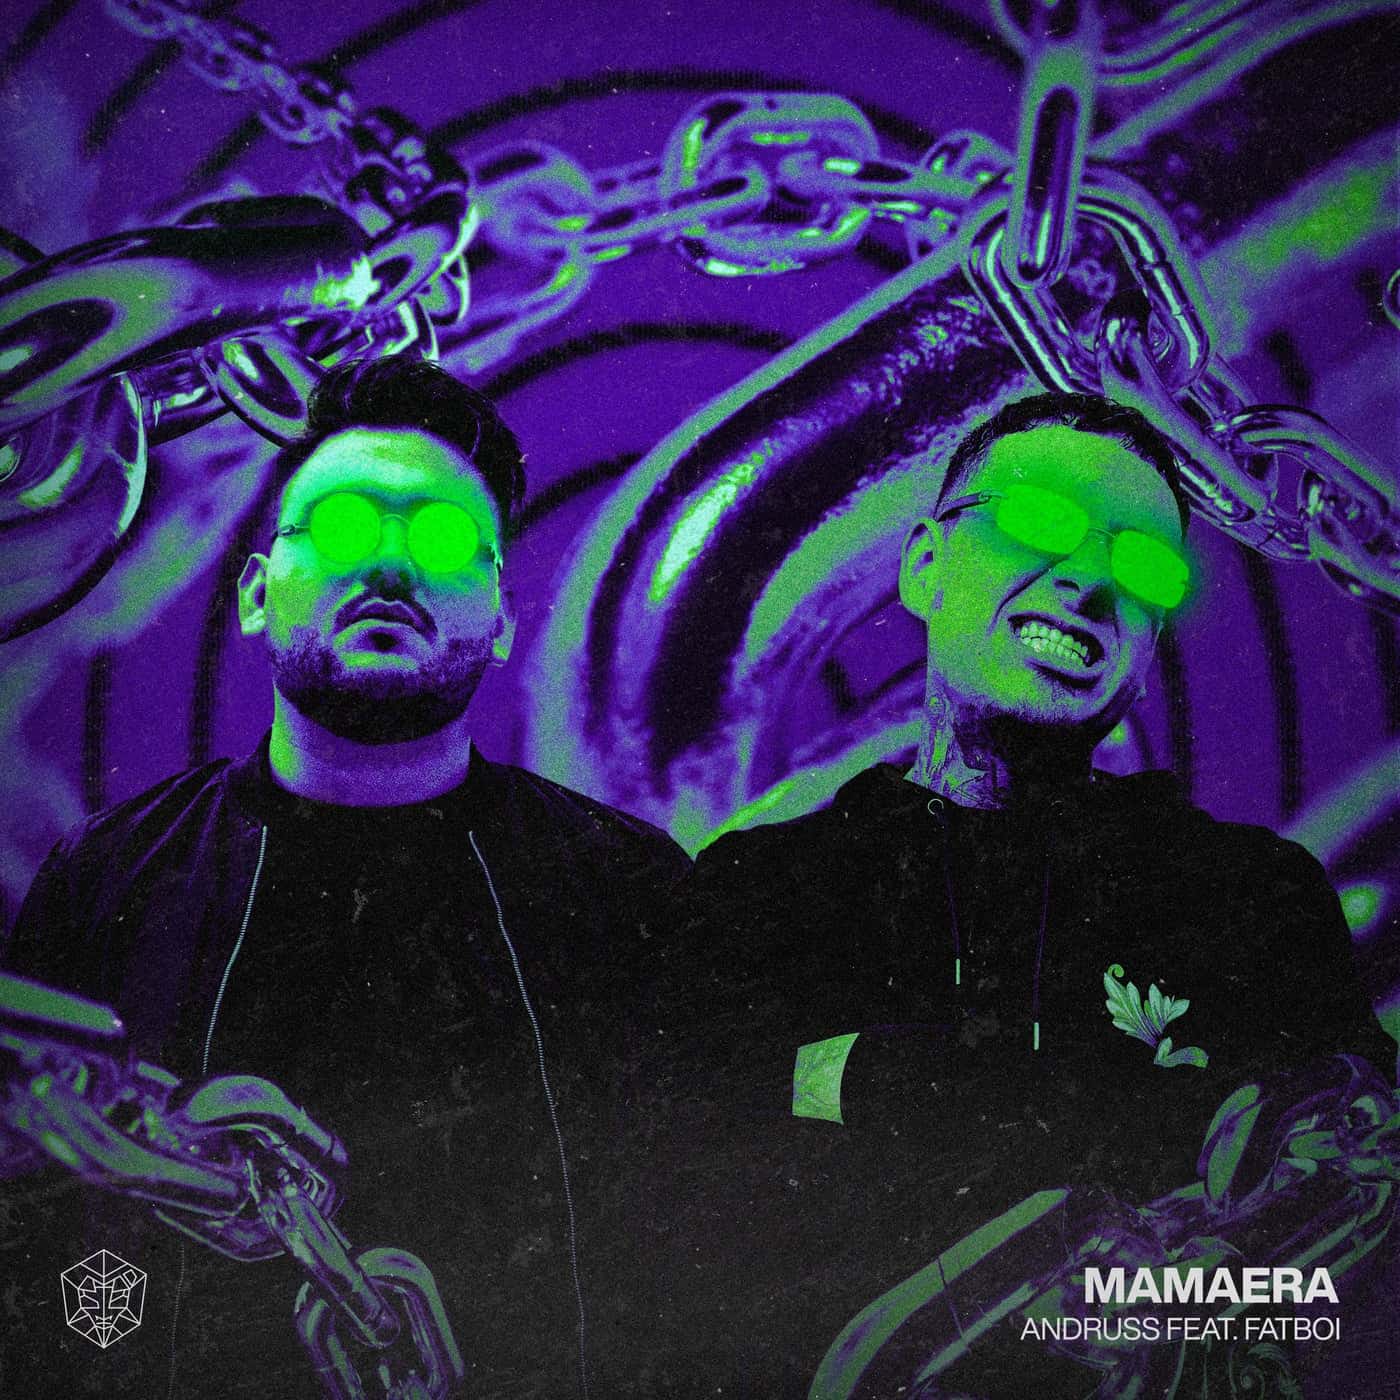 Download Andruss, Fatboi - Mamaera - Extended Mix on Electrobuzz